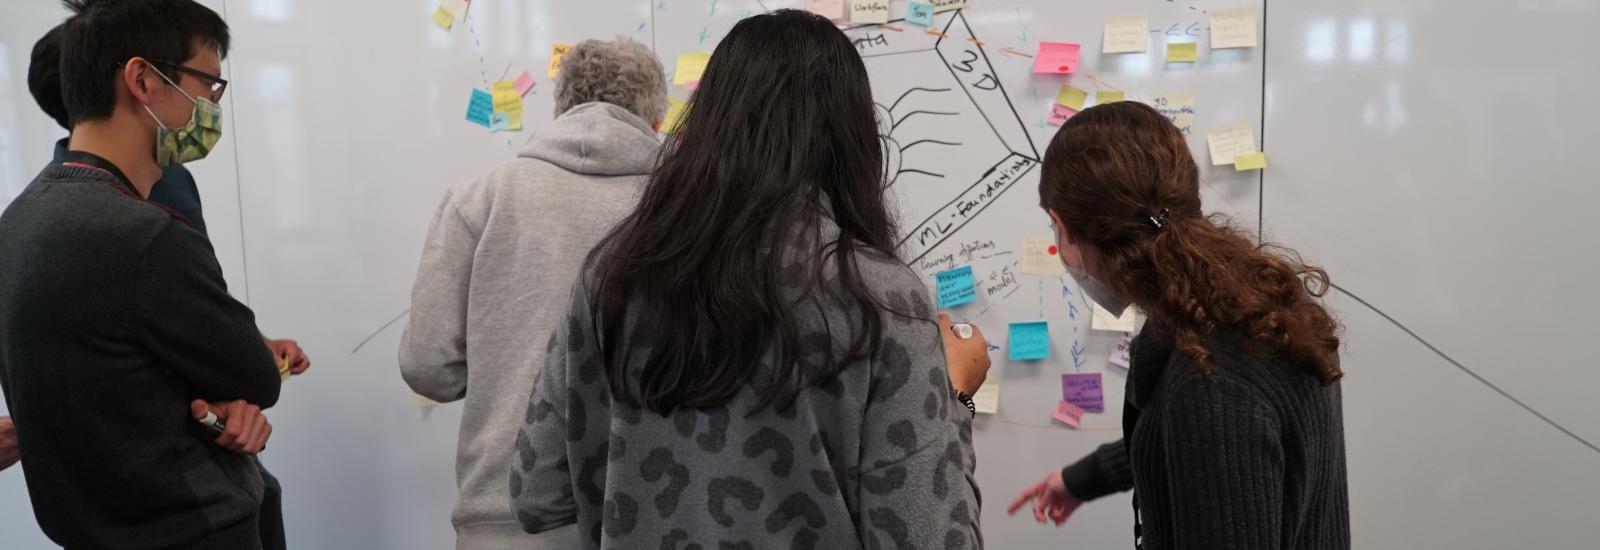 Researchers in a workshop adding stickie notes to a whiteboard wall